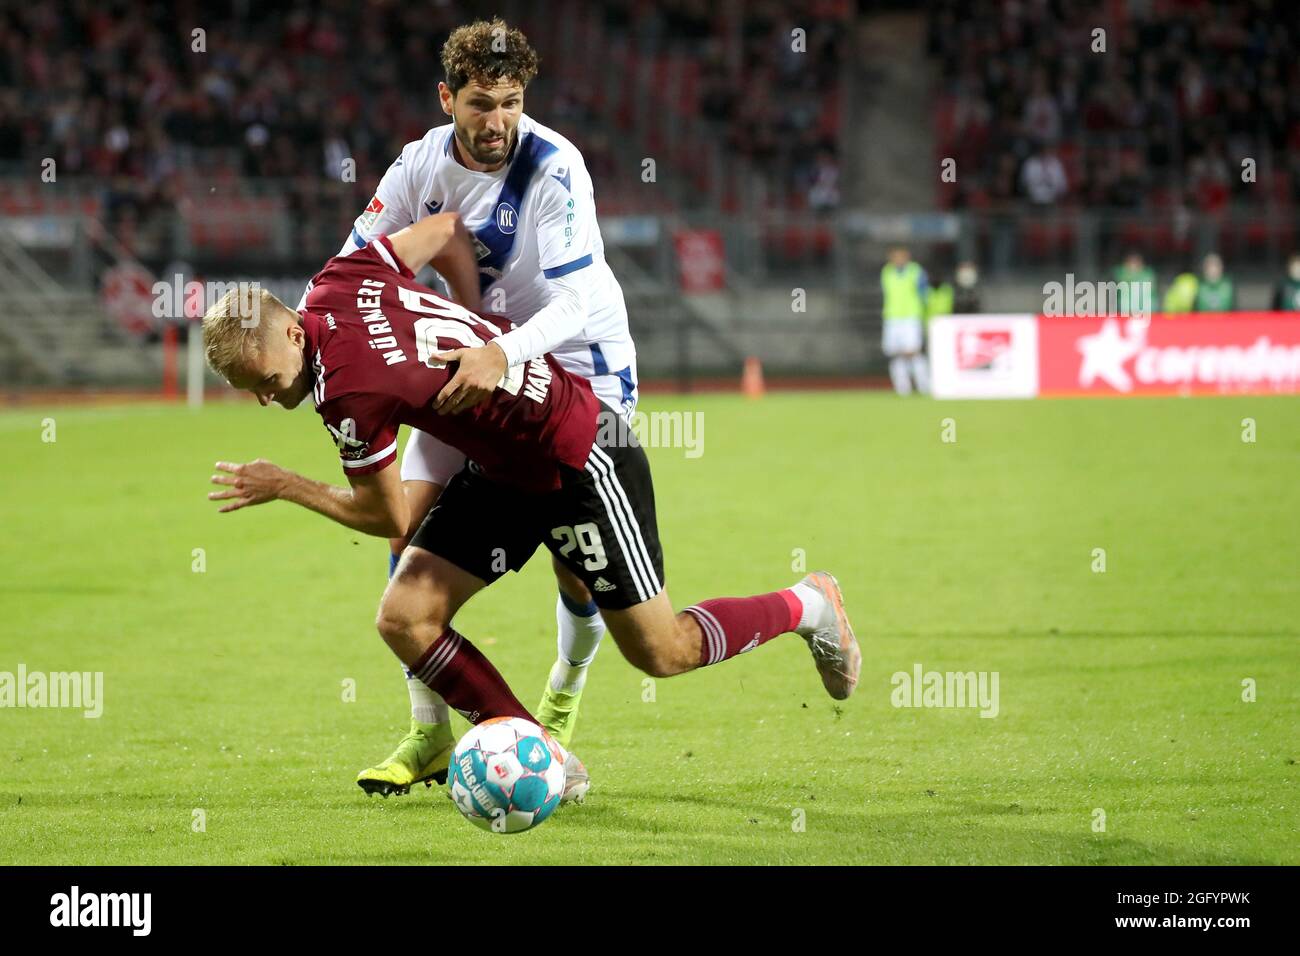 Nuremberg, Germany. 27th Aug, 2021. Football: 2nd Bundesliga, 1. FC Nürnberg - Karlsruher SC, Matchday 5 at Max Morlock Stadium. Nuremberg's Tim Handwerker (v) fights for the ball with Karlsruhe's Fabio Kaufmann. Credit: Daniel Karmann/dpa - IMPORTANT NOTE: In accordance with the regulations of the DFL Deutsche Fußball Liga and/or the DFB Deutscher Fußball-Bund, it is prohibited to use or have used photographs taken in the stadium and/or of the match in the form of sequence pictures and/or video-like photo series./dpa/Alamy Live News Stock Photo